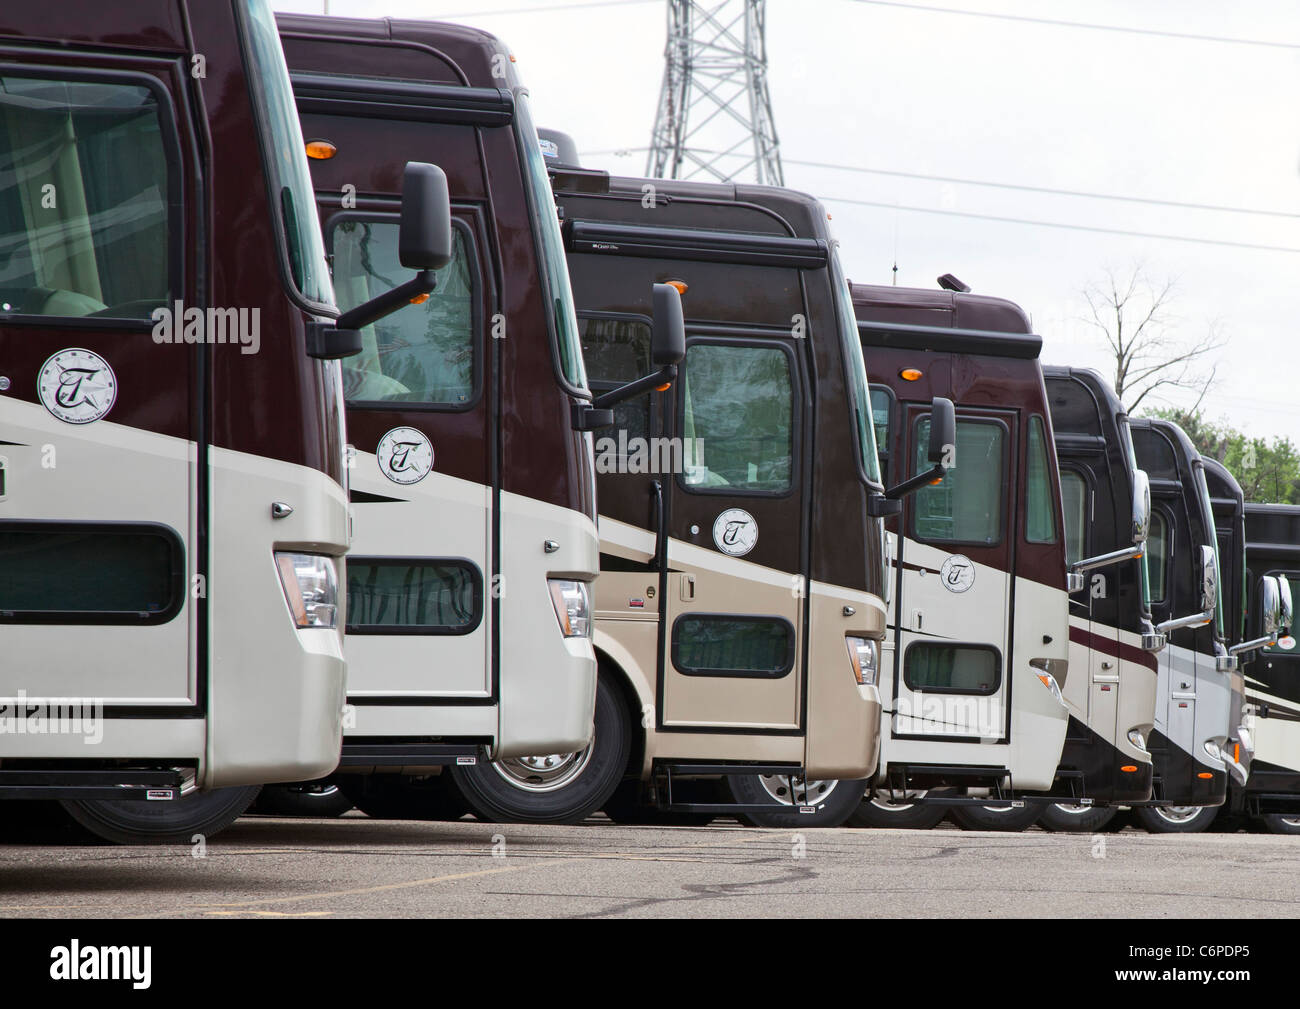 Wixom, Michigan - Luxury recreational vehicles on sale at an RV dealer. Stock Photo